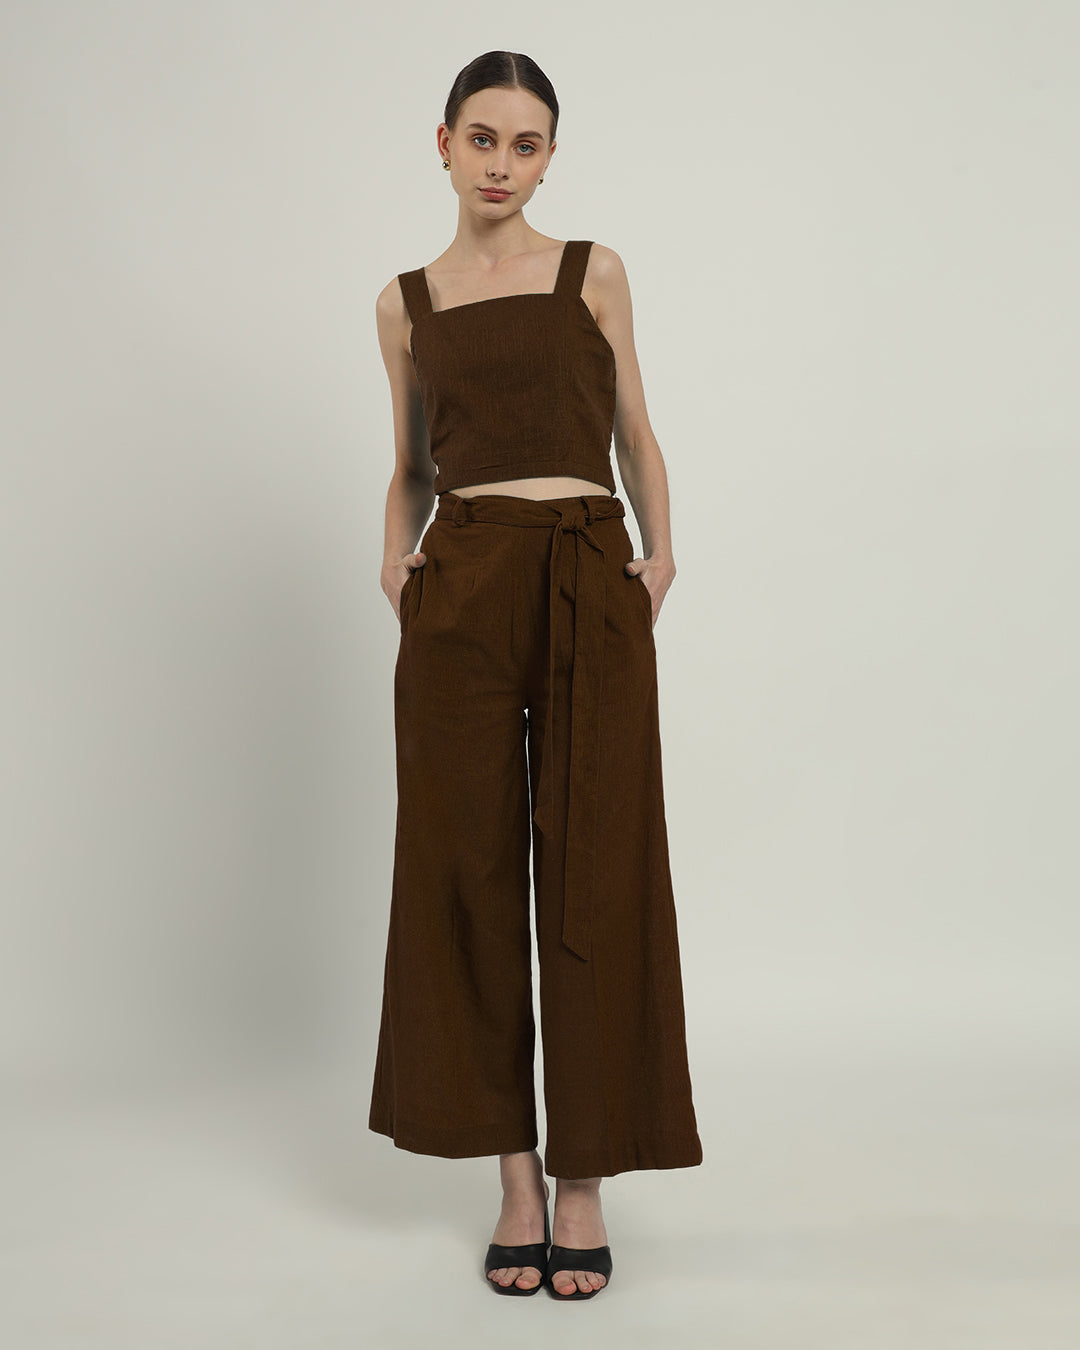 Nutshell Sleek Square Crop Top (Without Bottoms)